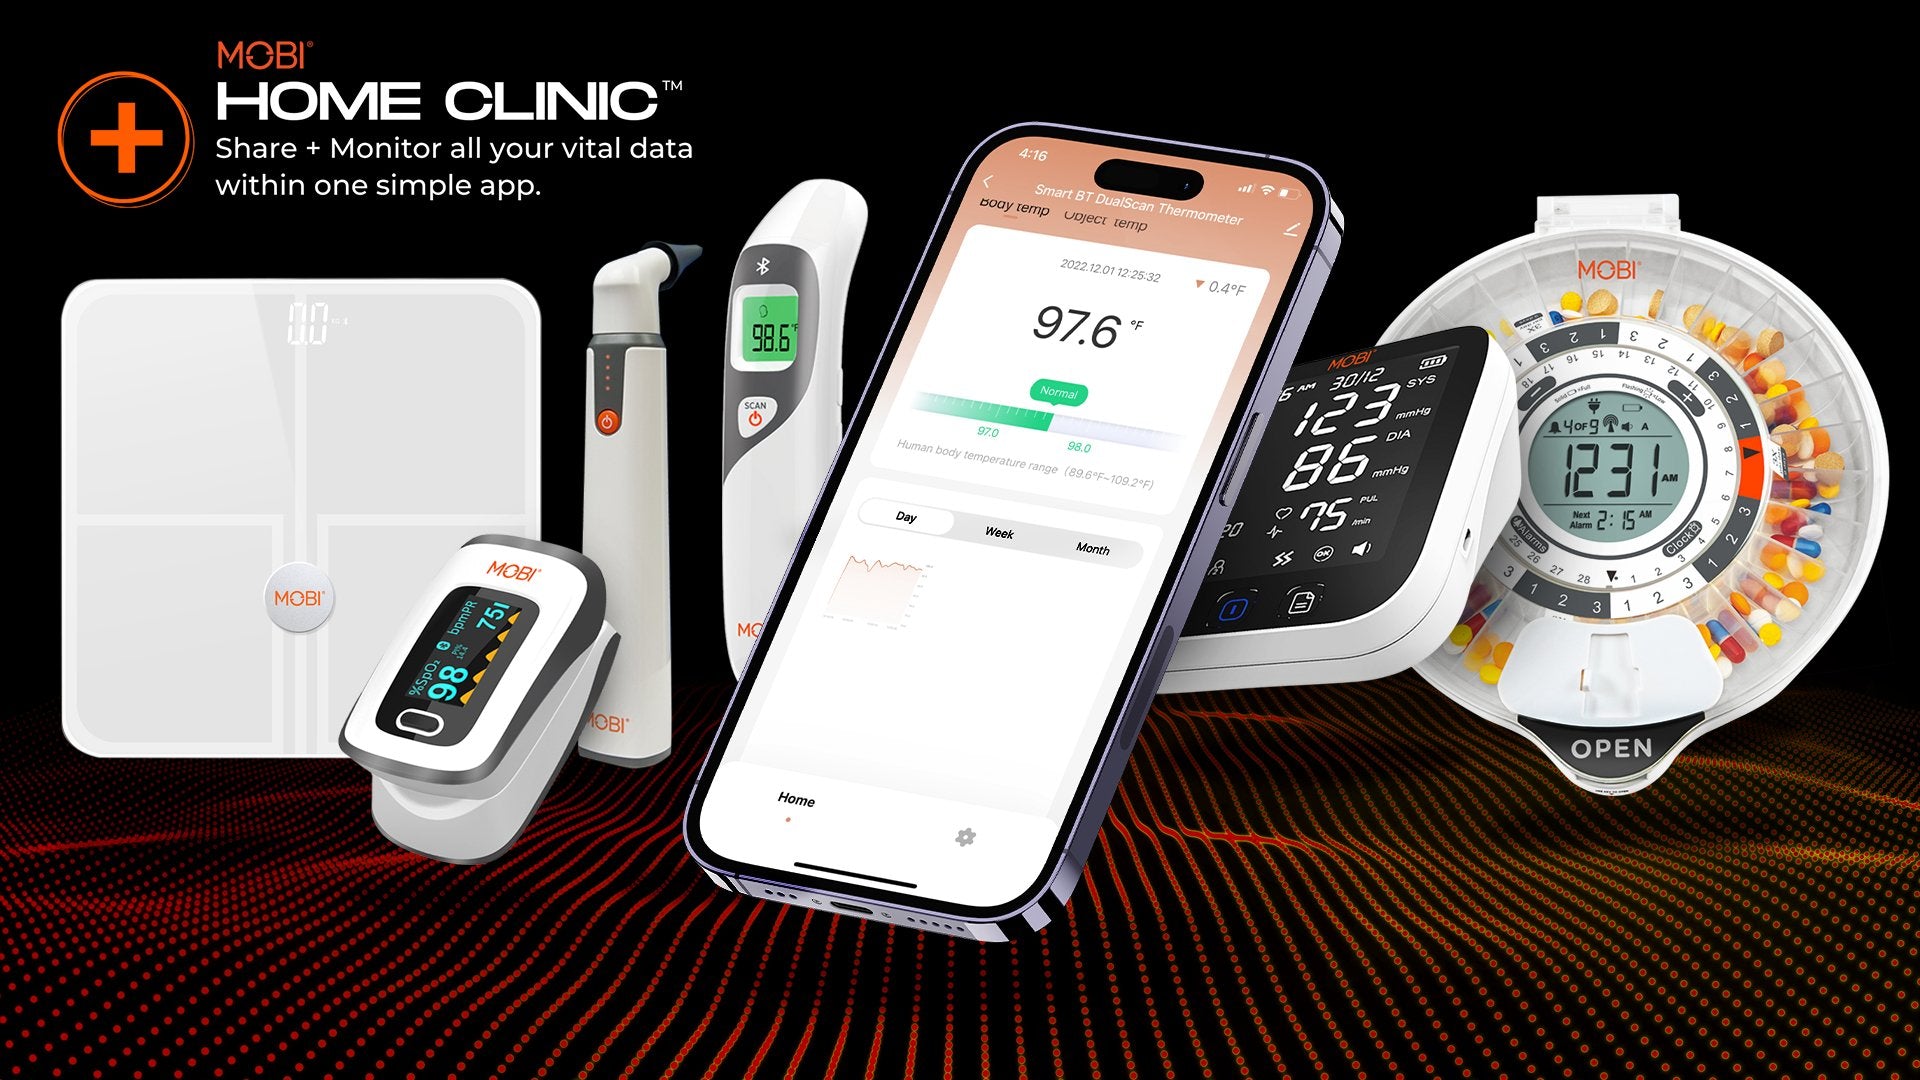 Making The Home Clinic A Seamless Part Of Your Everyday Health Routine - MOBI USA